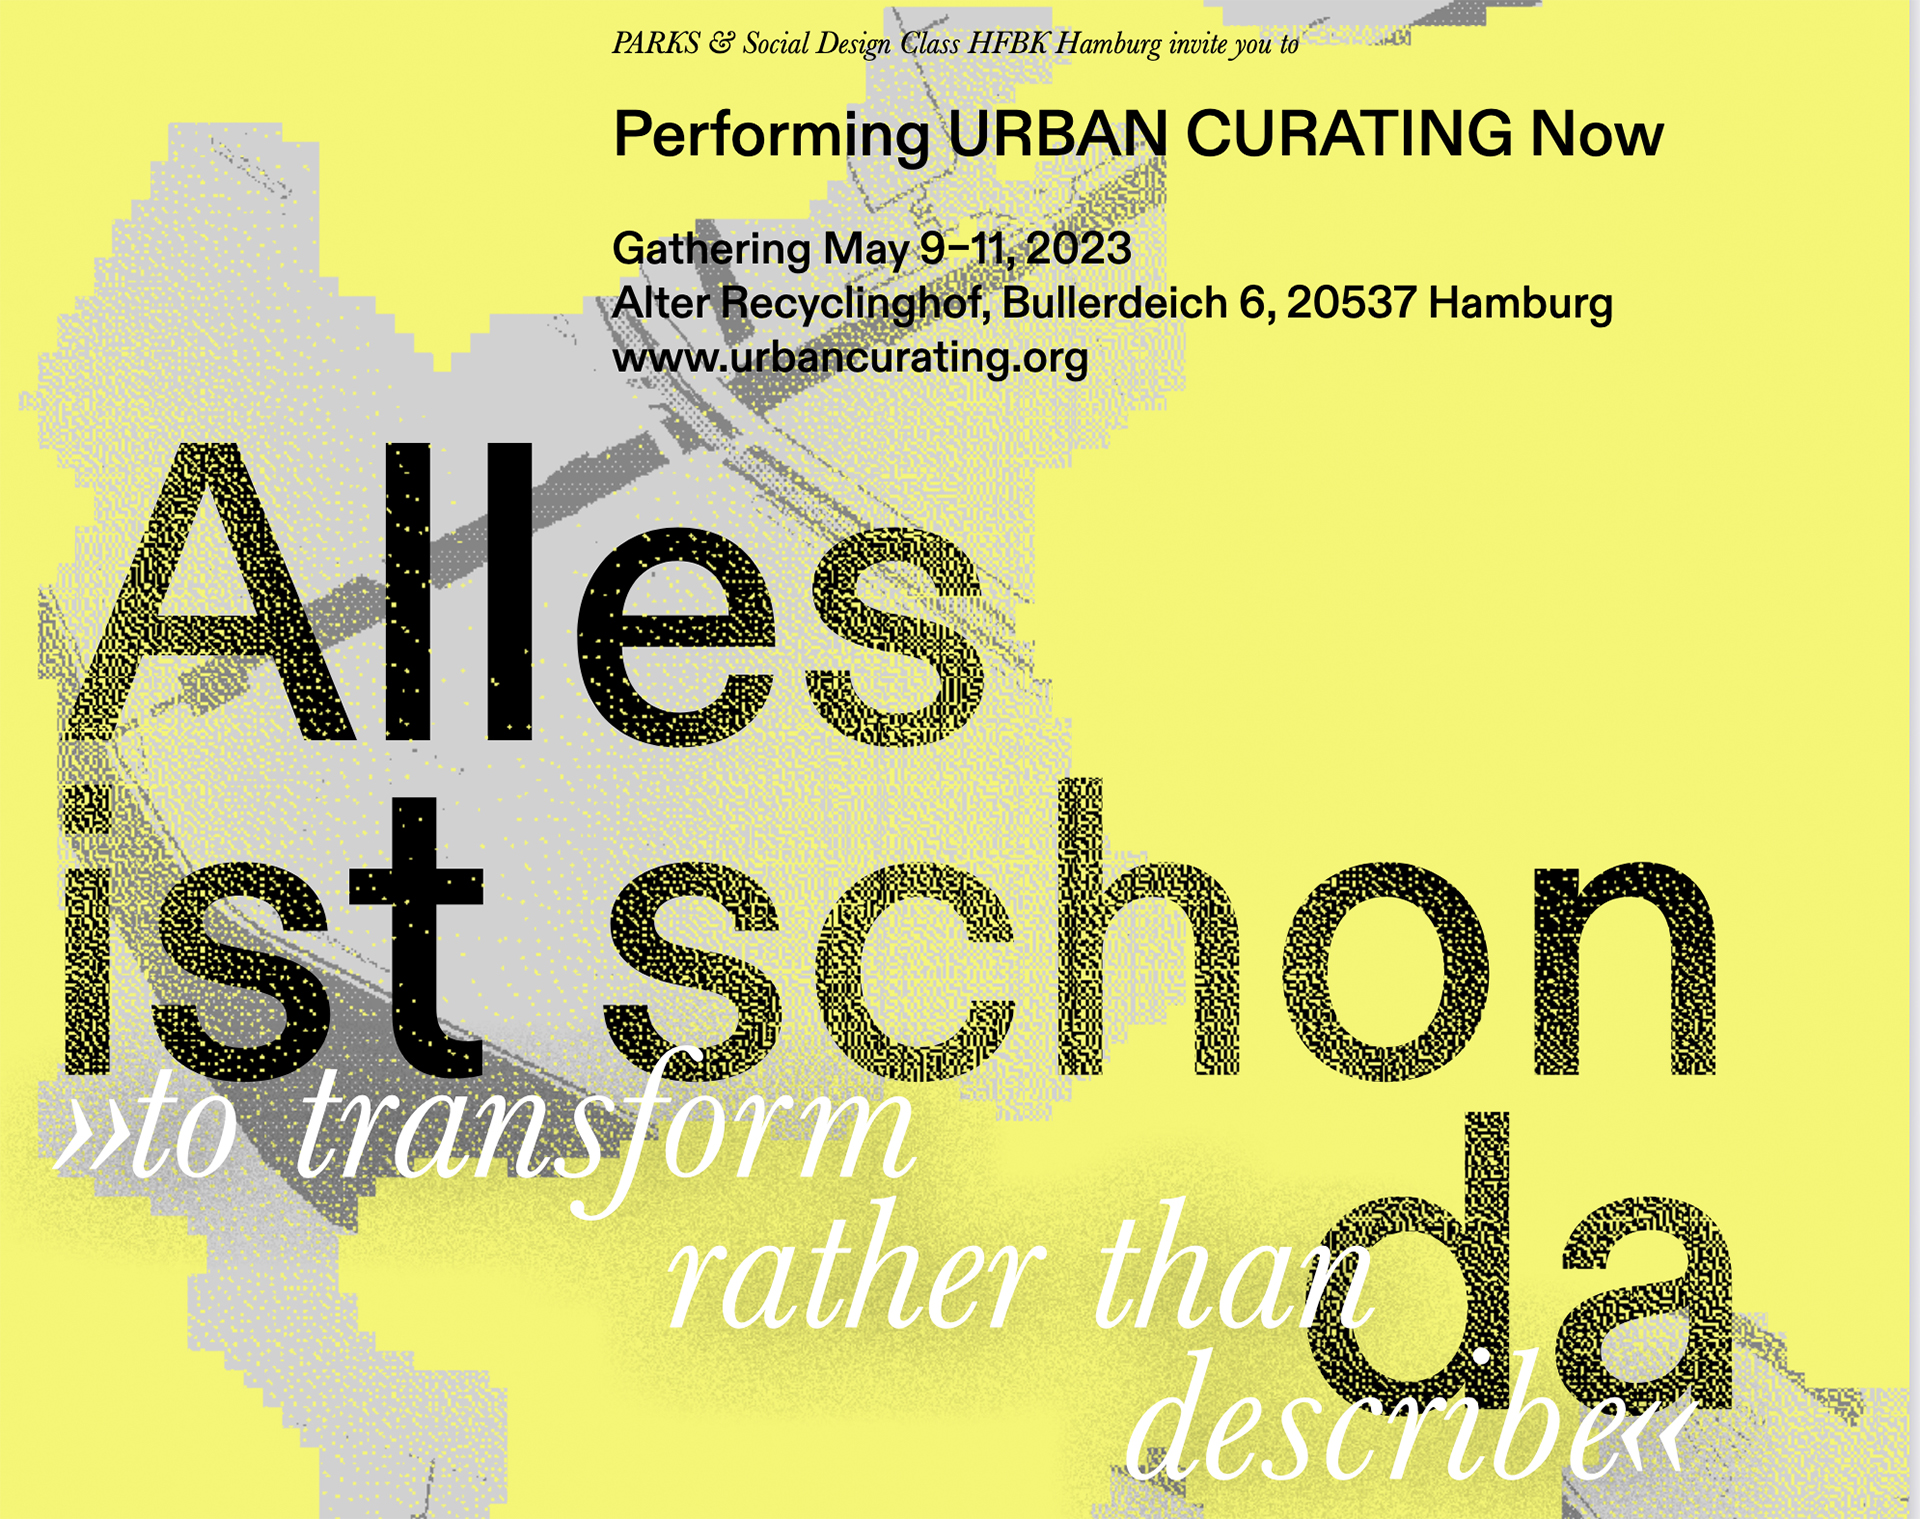 ALLES IST SCHON DA - Performing URBAN CURATING Now